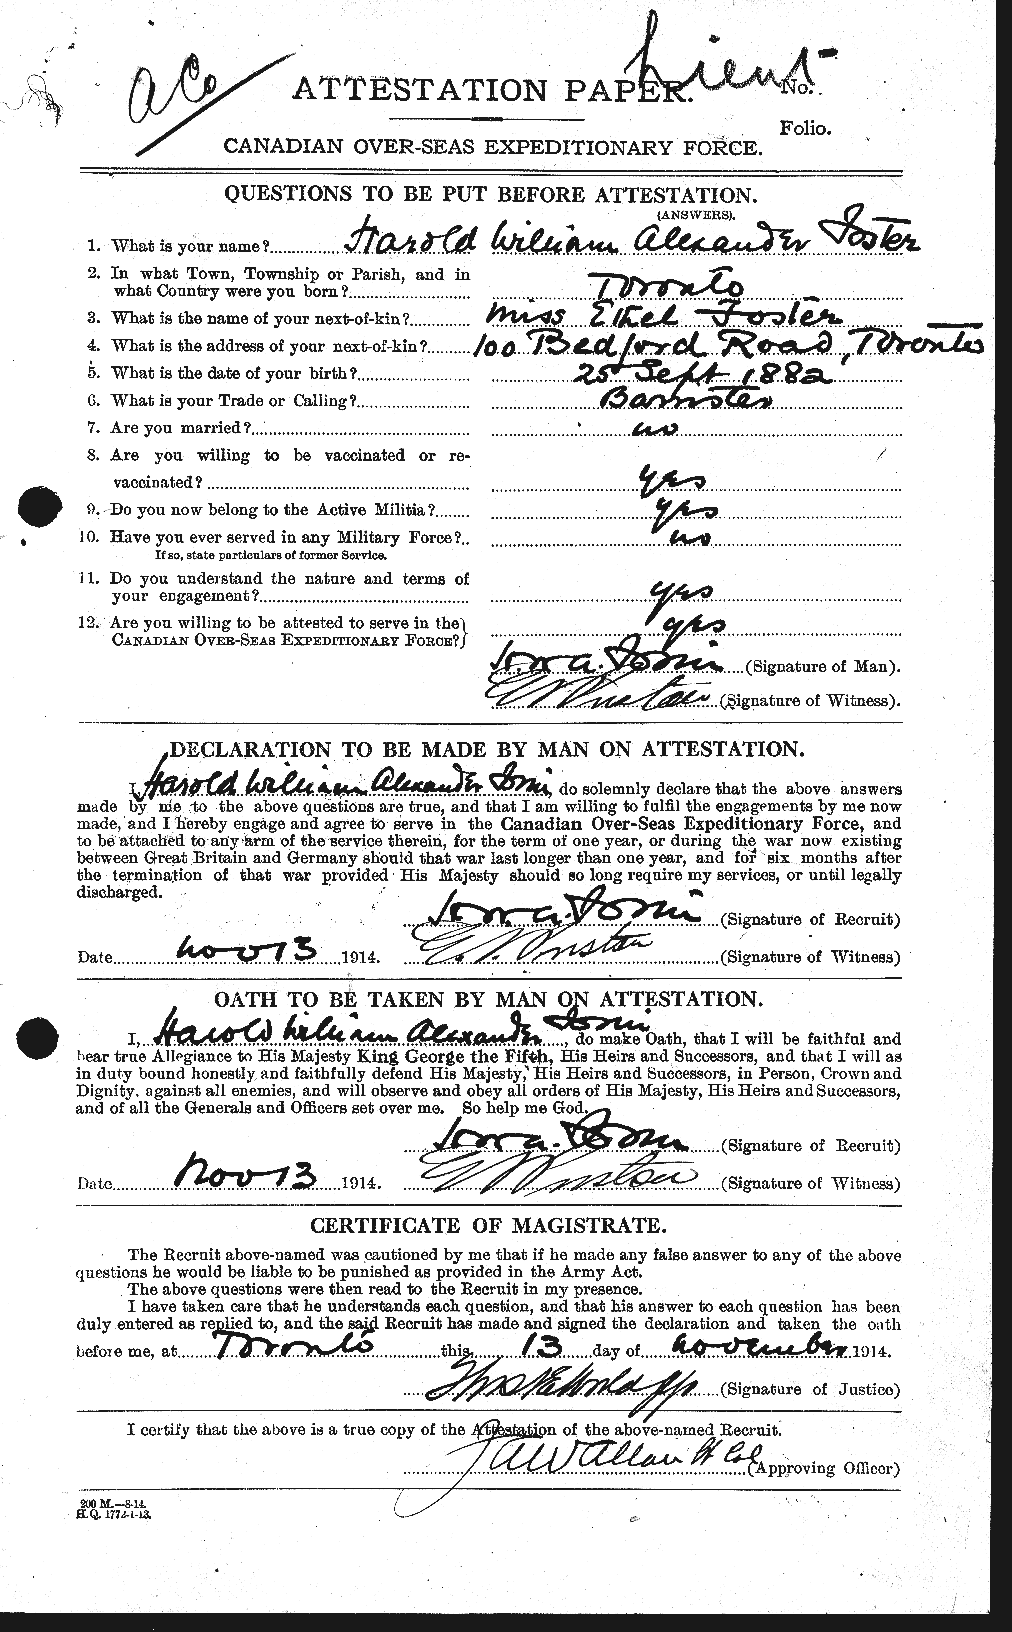 Personnel Records of the First World War - CEF 330732a